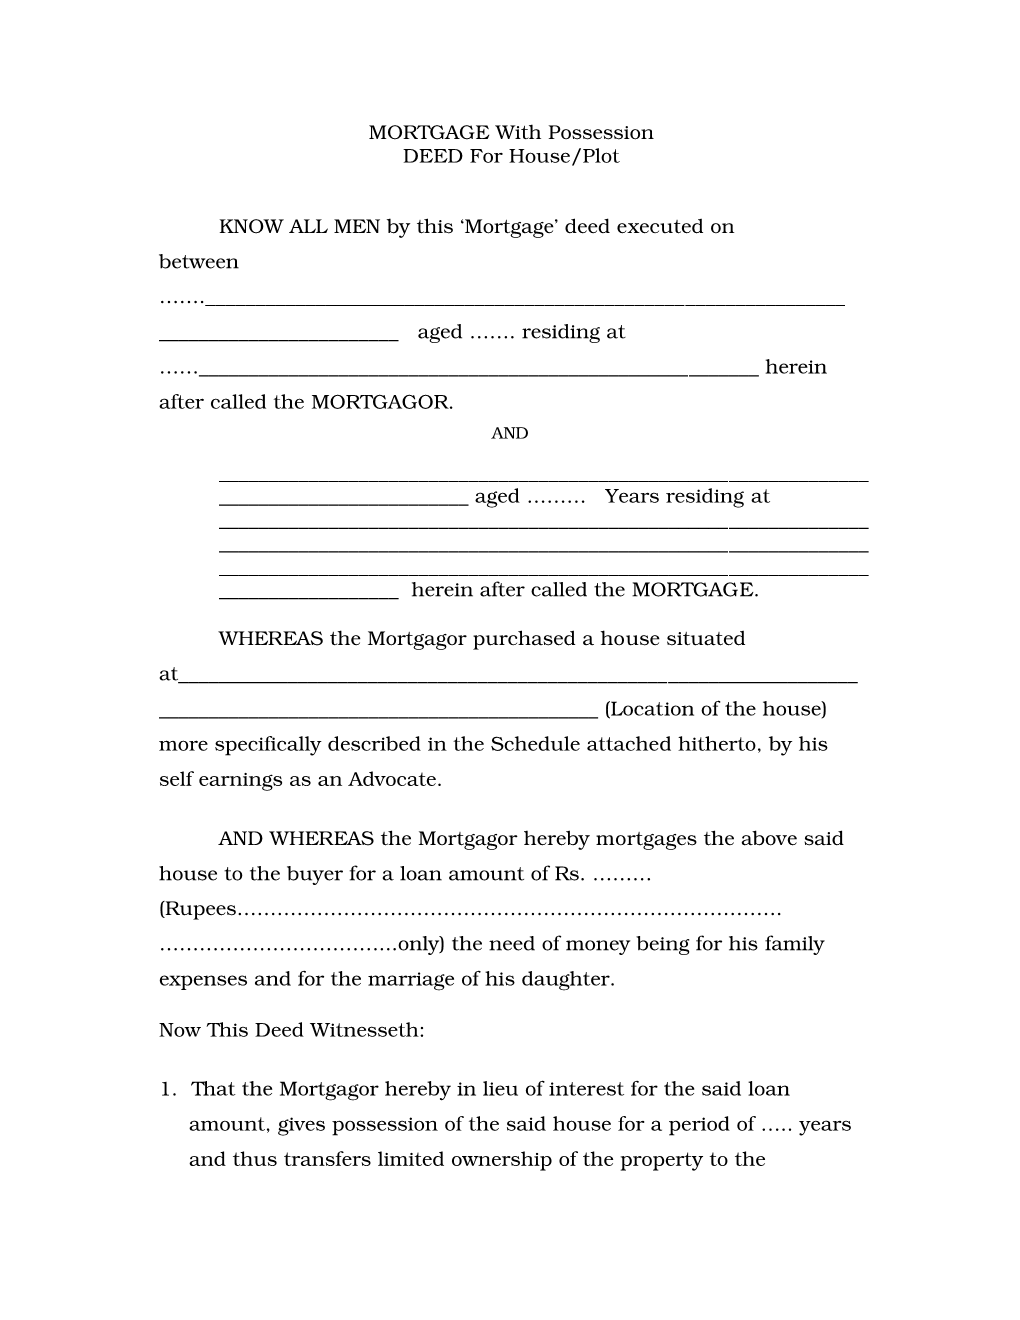 MORTGAGE with Possession DEED for House/Plot KNOW ALL MEN By